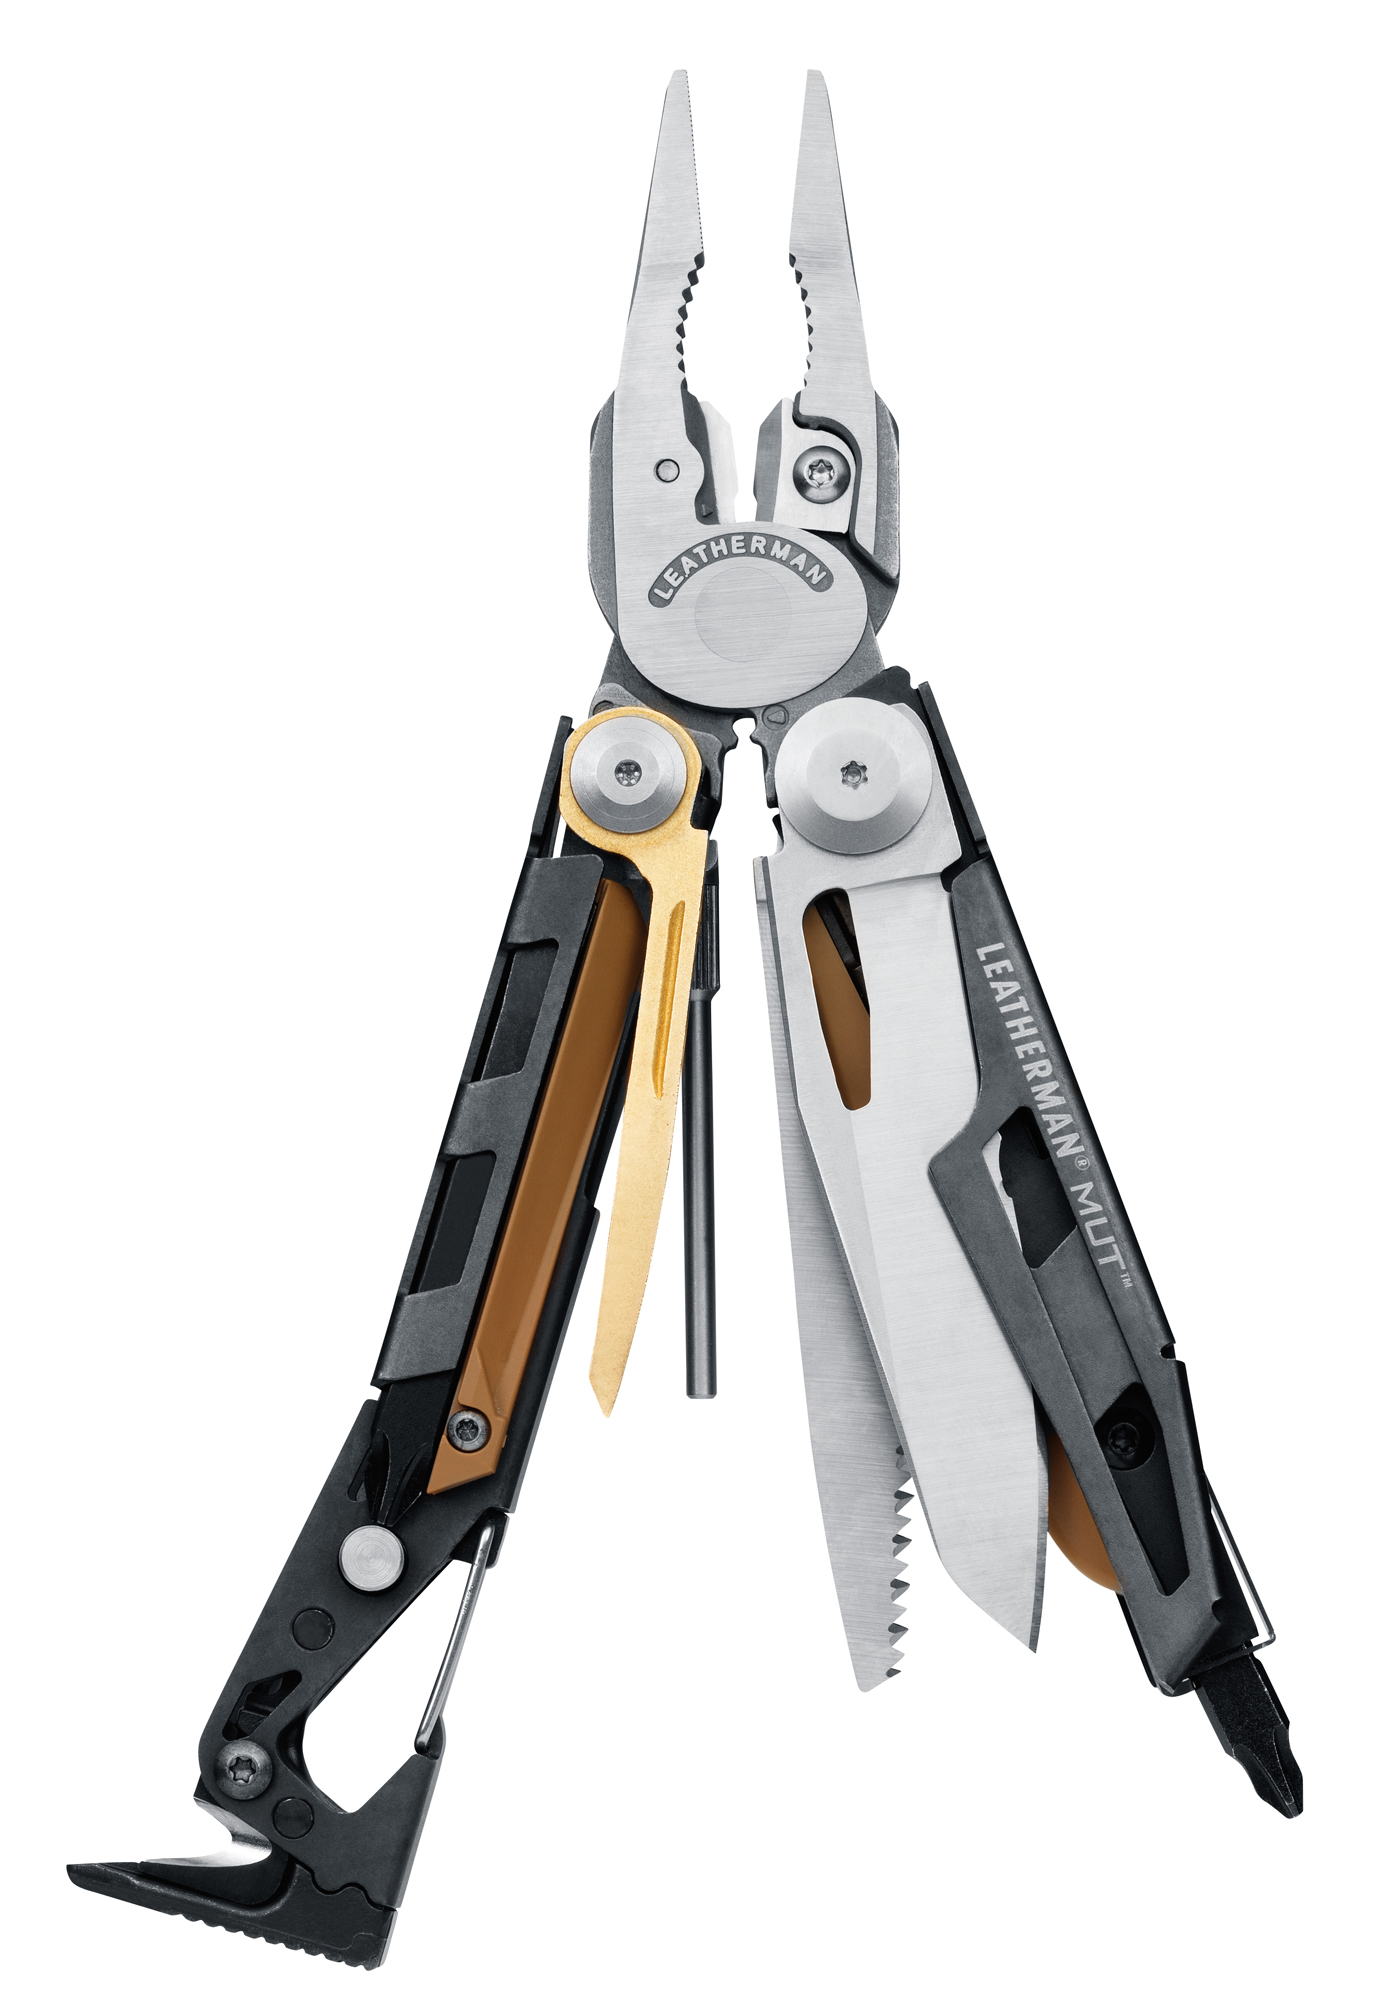 Leatherman - Mut Multitool With Premium Replaceable Wire Cutters And Firearm Tools, Stainless Steel With Molle Black Sheath - image 1 of 4